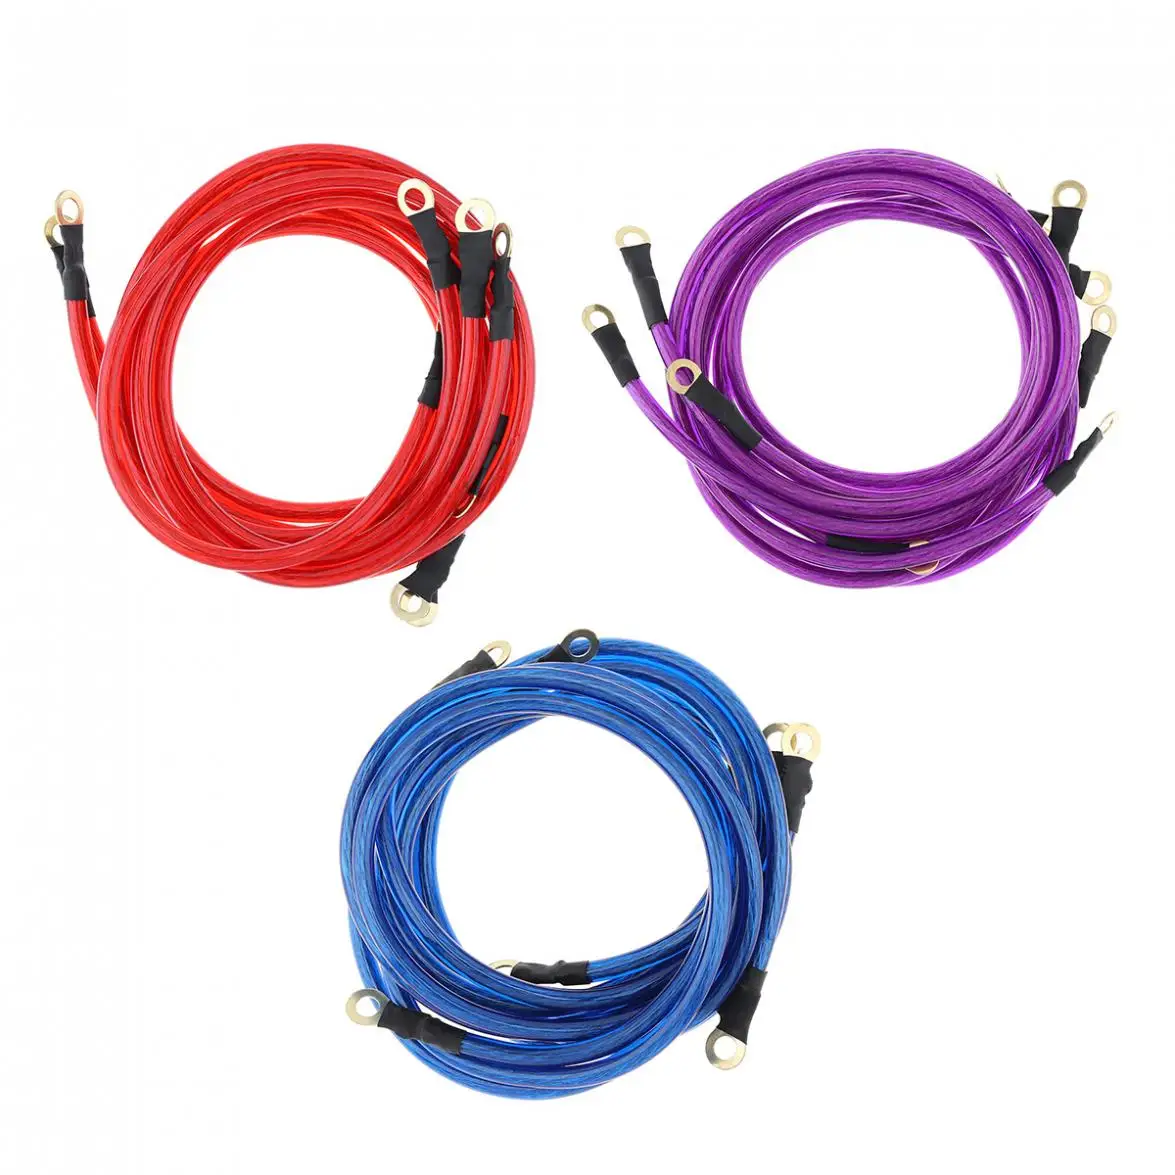 Details about   Universal Vehicle 5-Point Performance Car Grounding Wire Ground Cable System Kit 